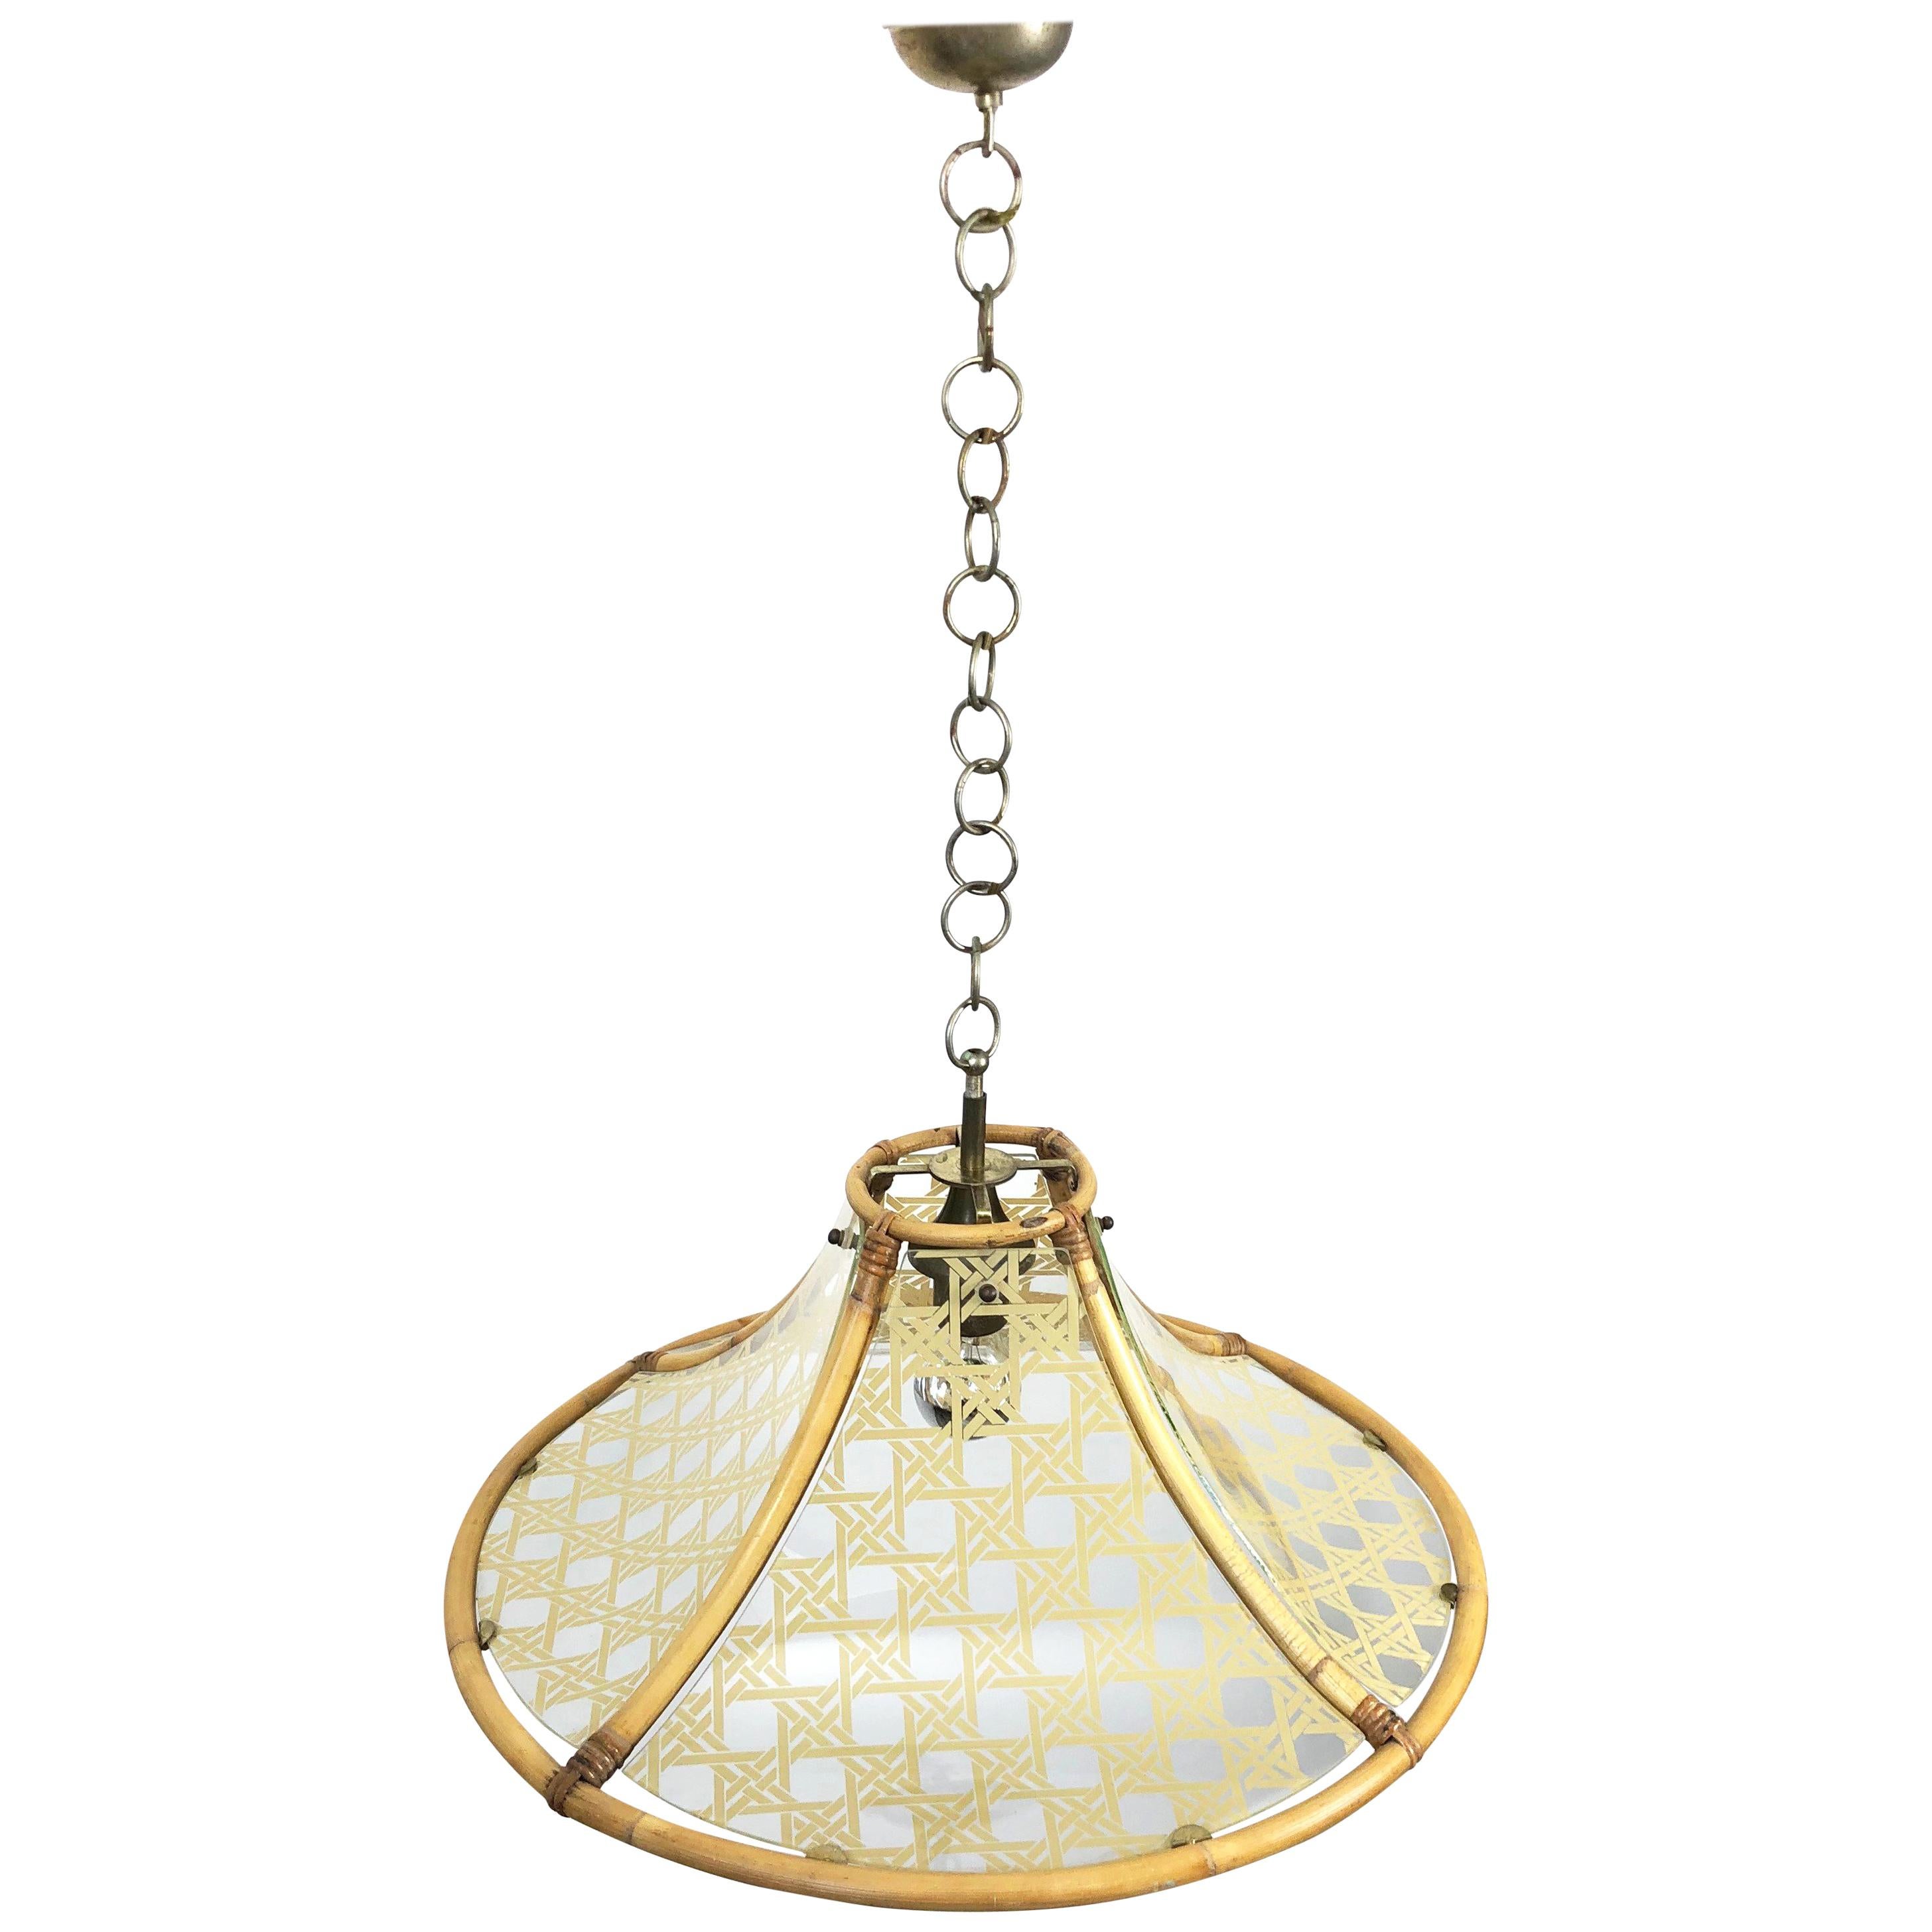 Chandelier in Bamboo, Glass and Rattan, Metal Pendant, Italy, 1960s